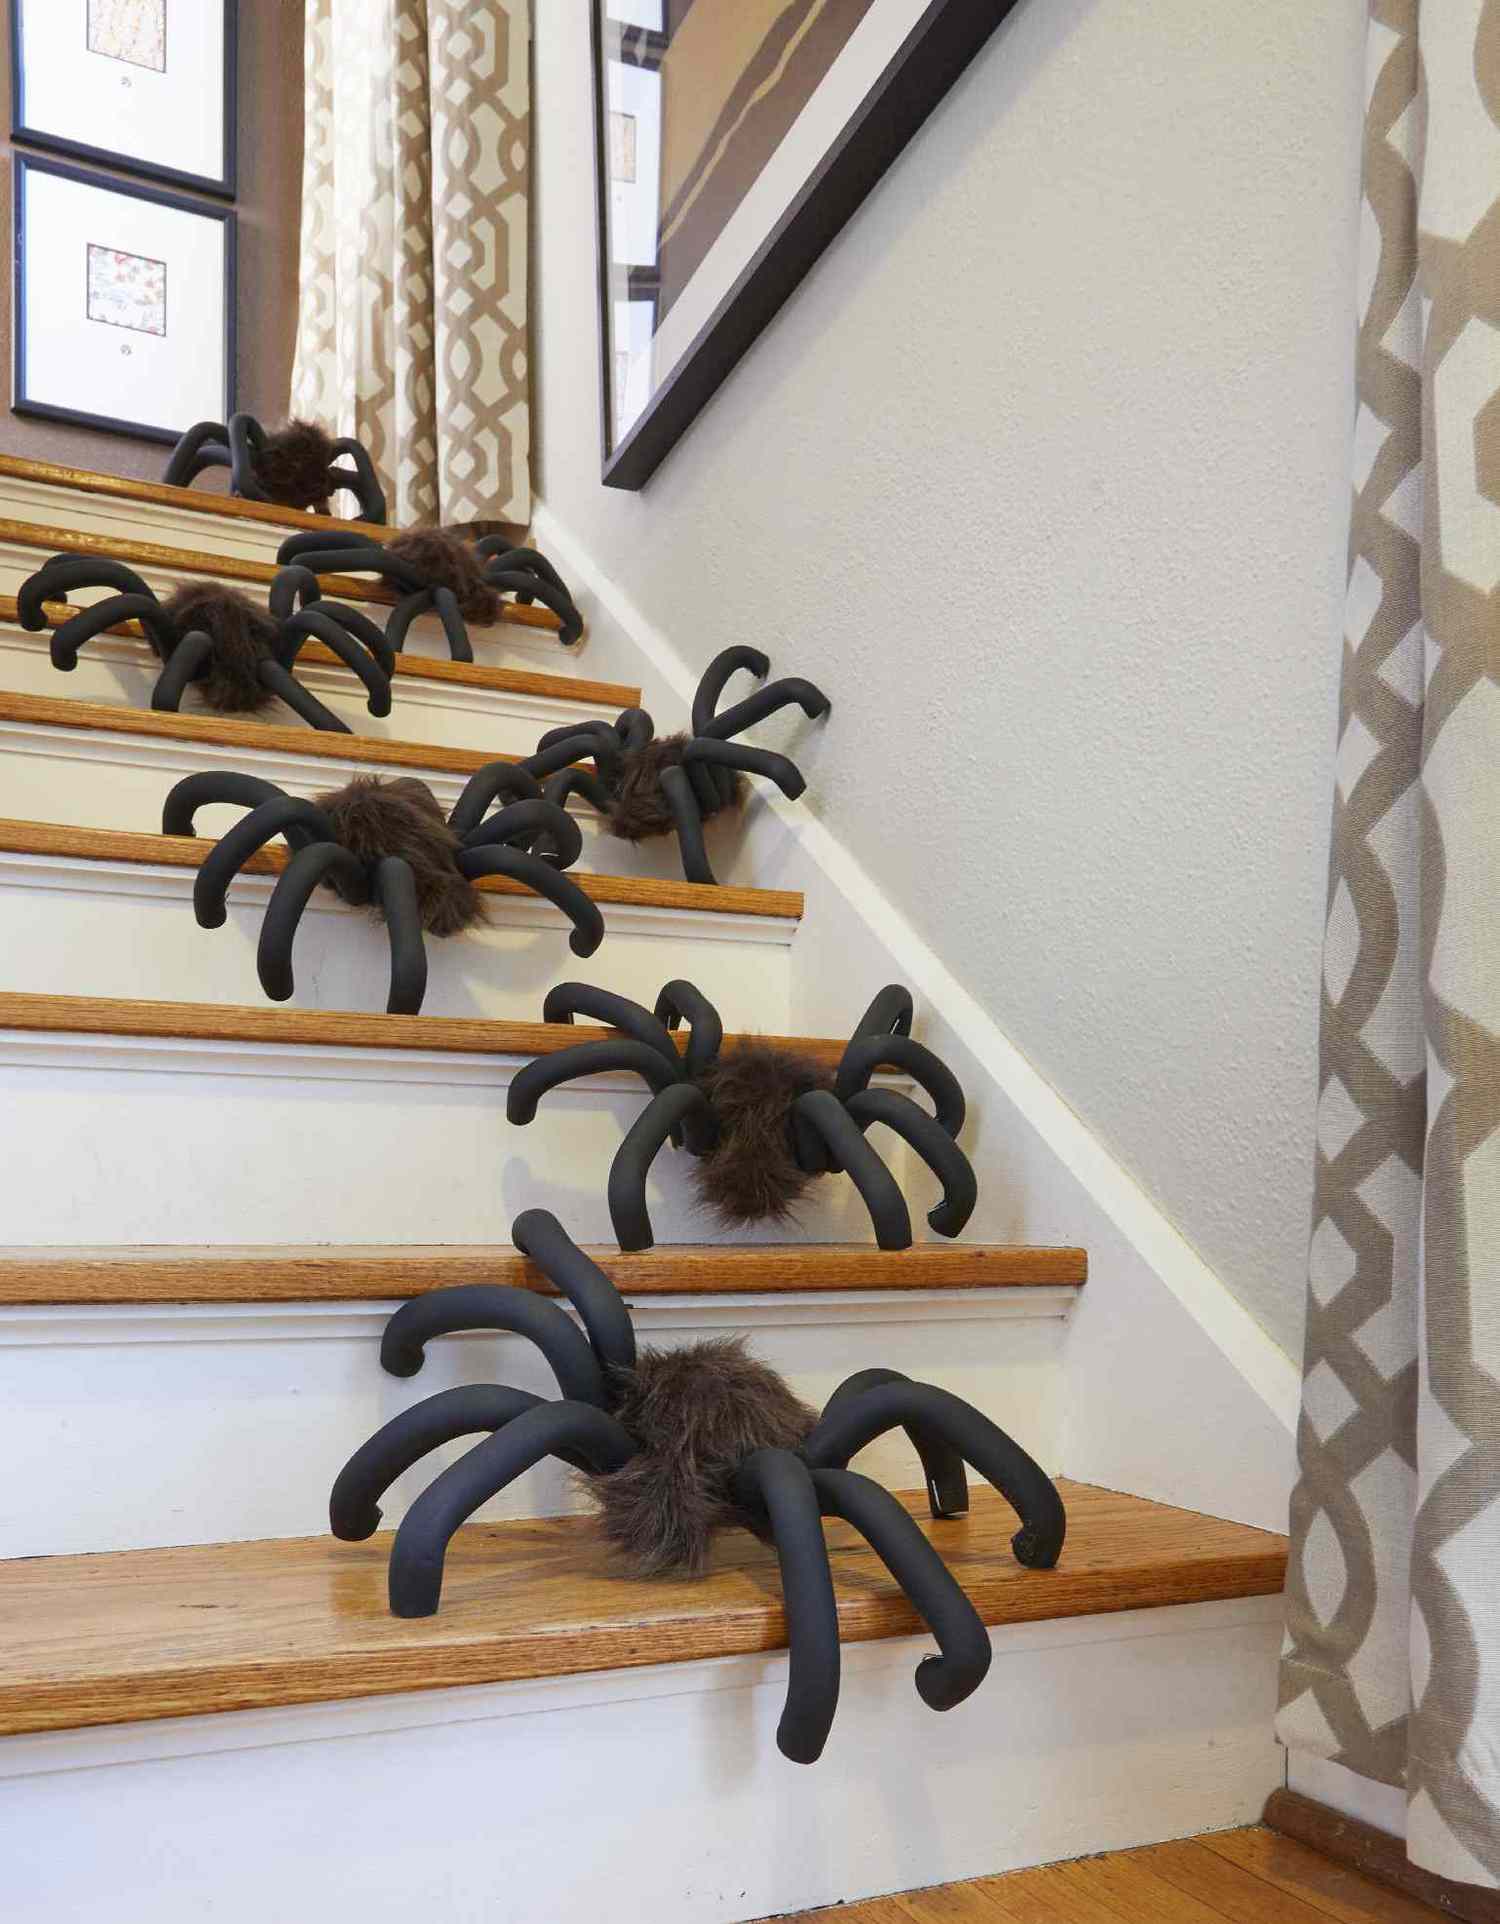 These Giant Diy Spiders Are Our New Favorite Halloween Decor Better Homes Gardens,Upper Corner Kitchen Cabinet Ideas